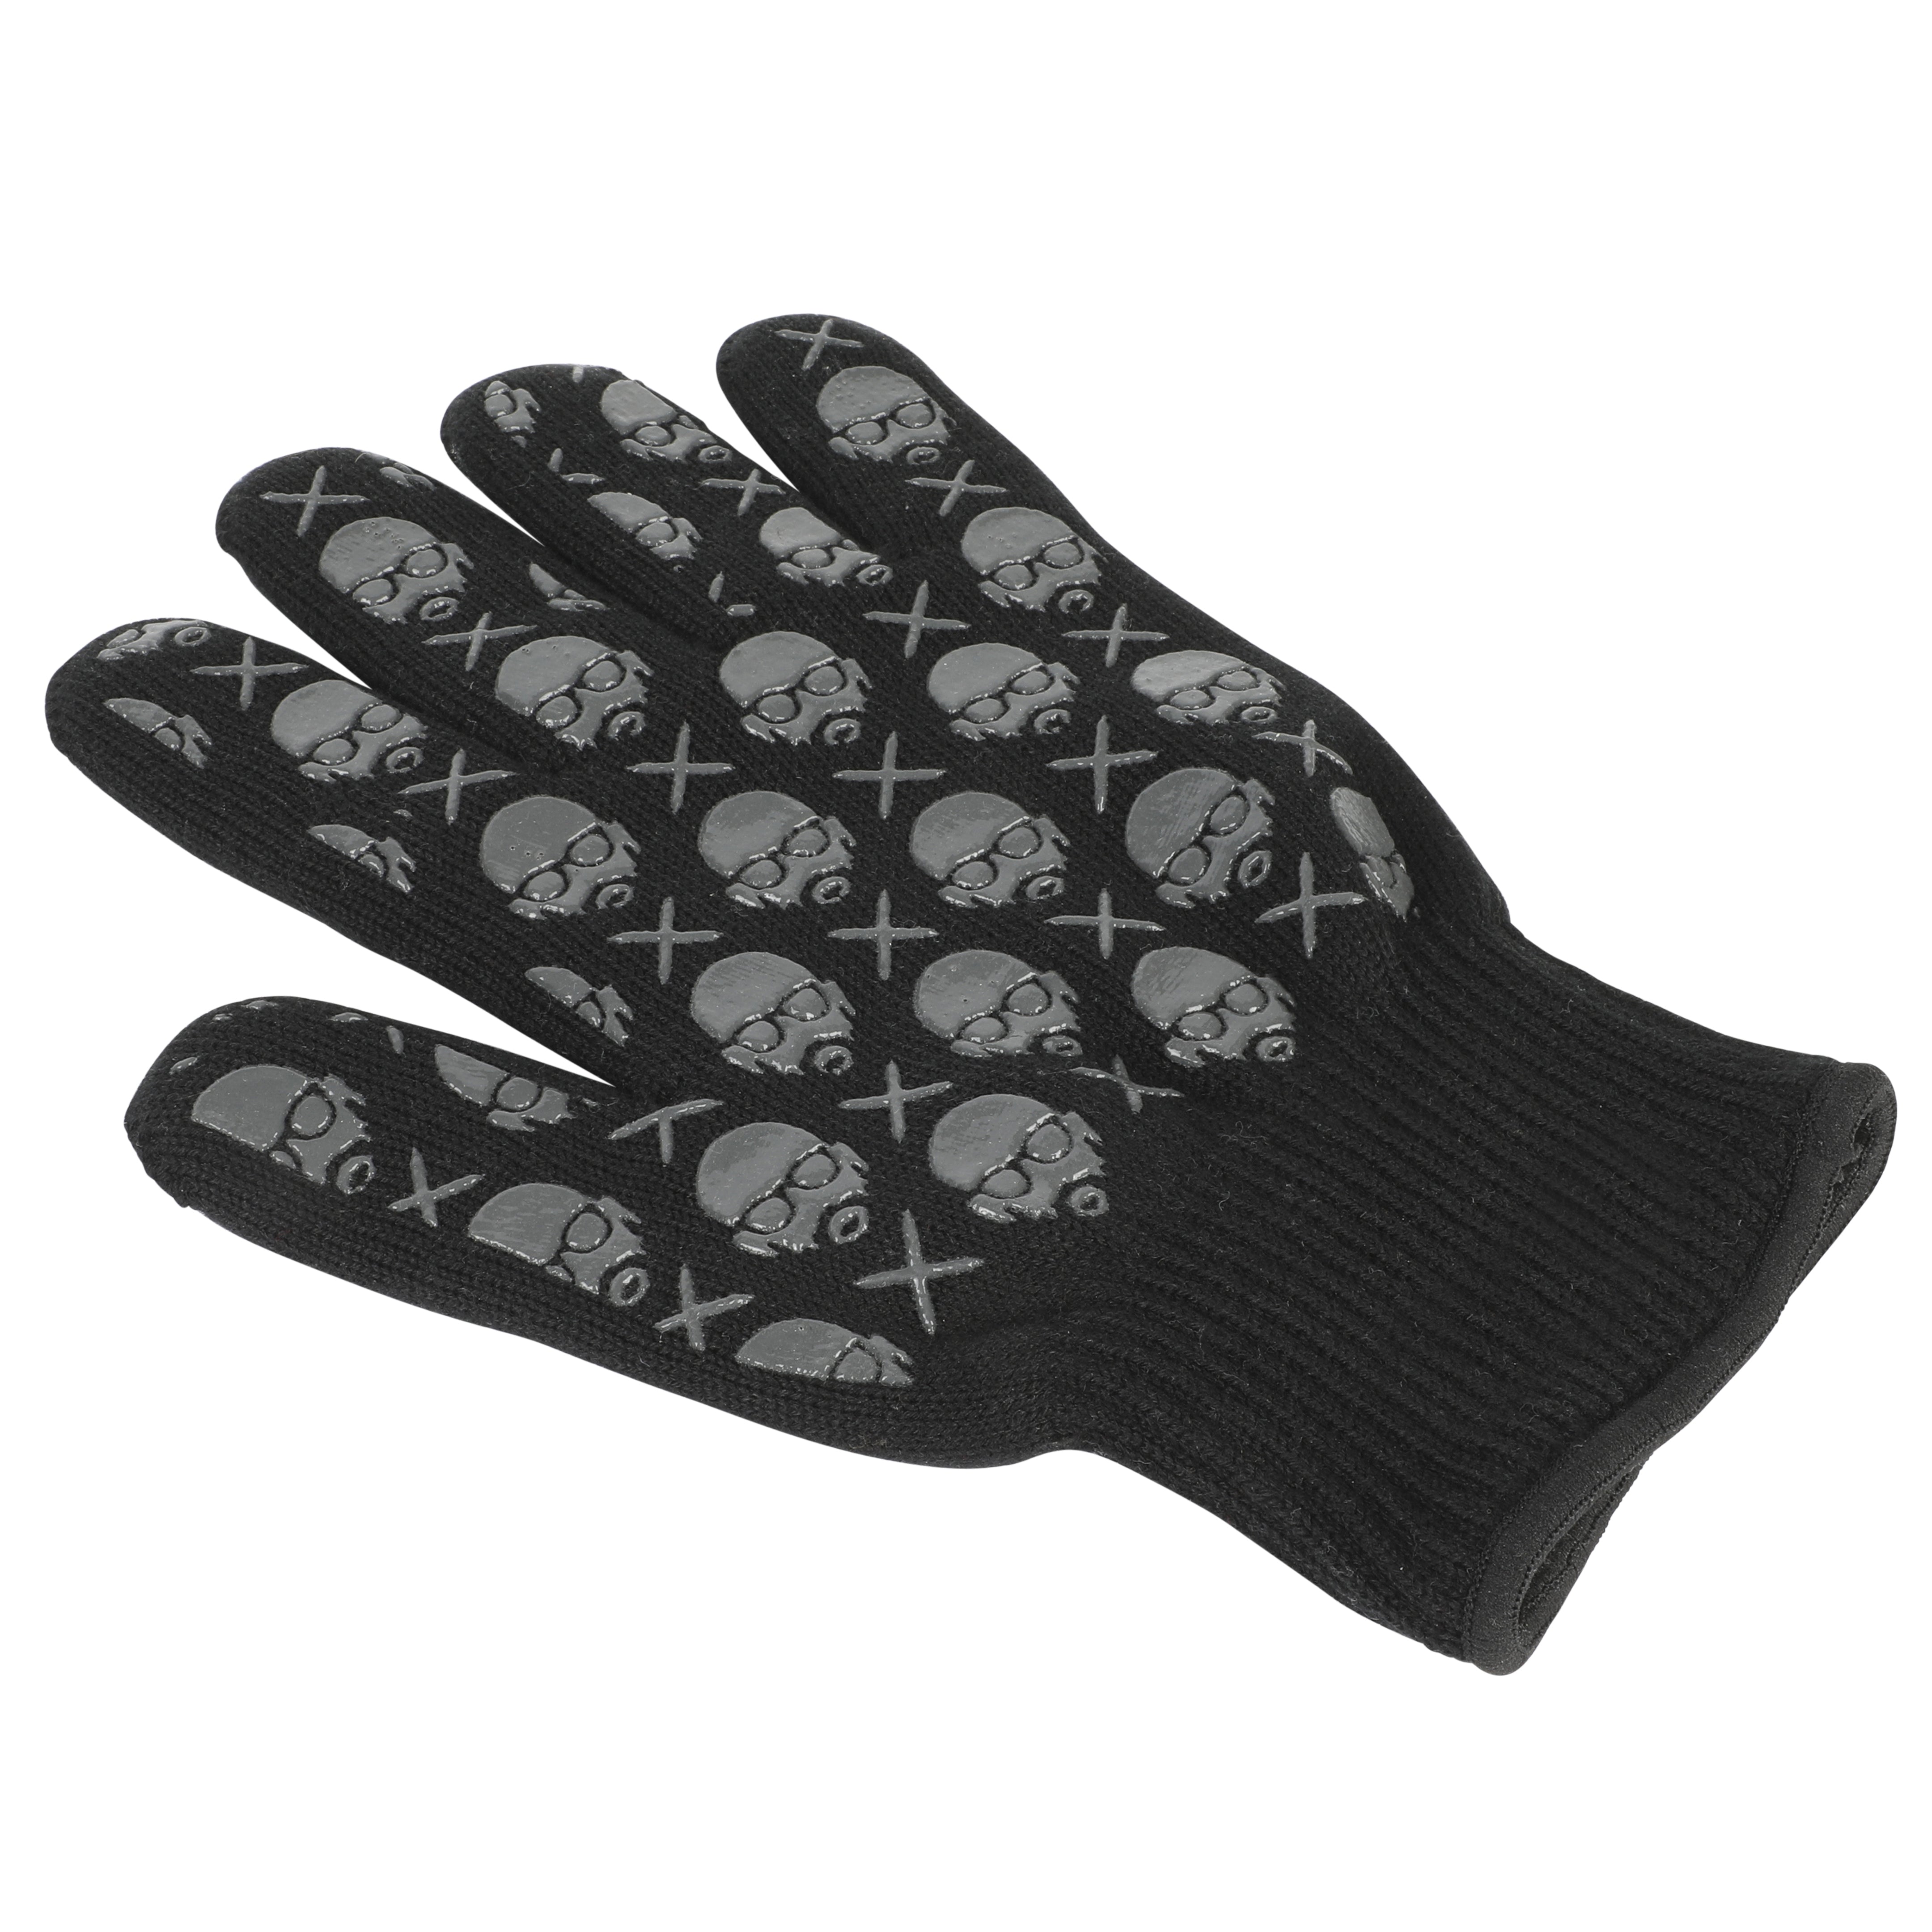 Babish 2 Pack Oven Mitts